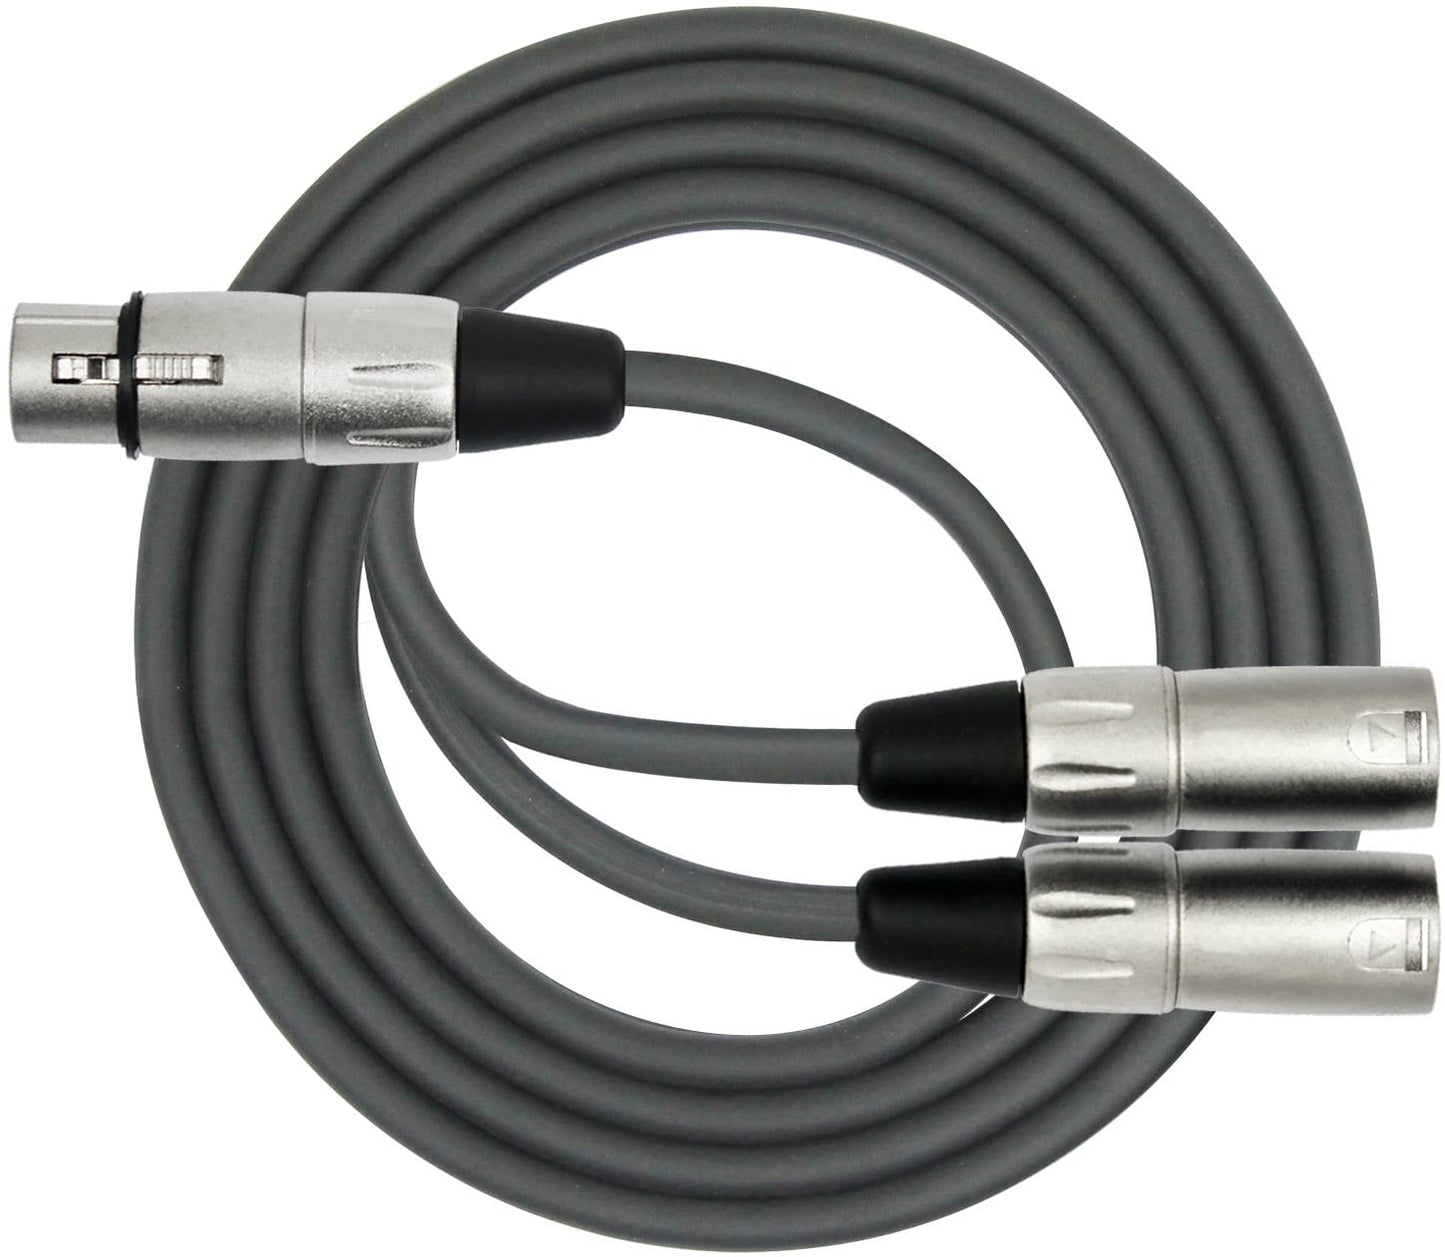 Kirlin Microphone Cable 6Ft XLR Male to Female